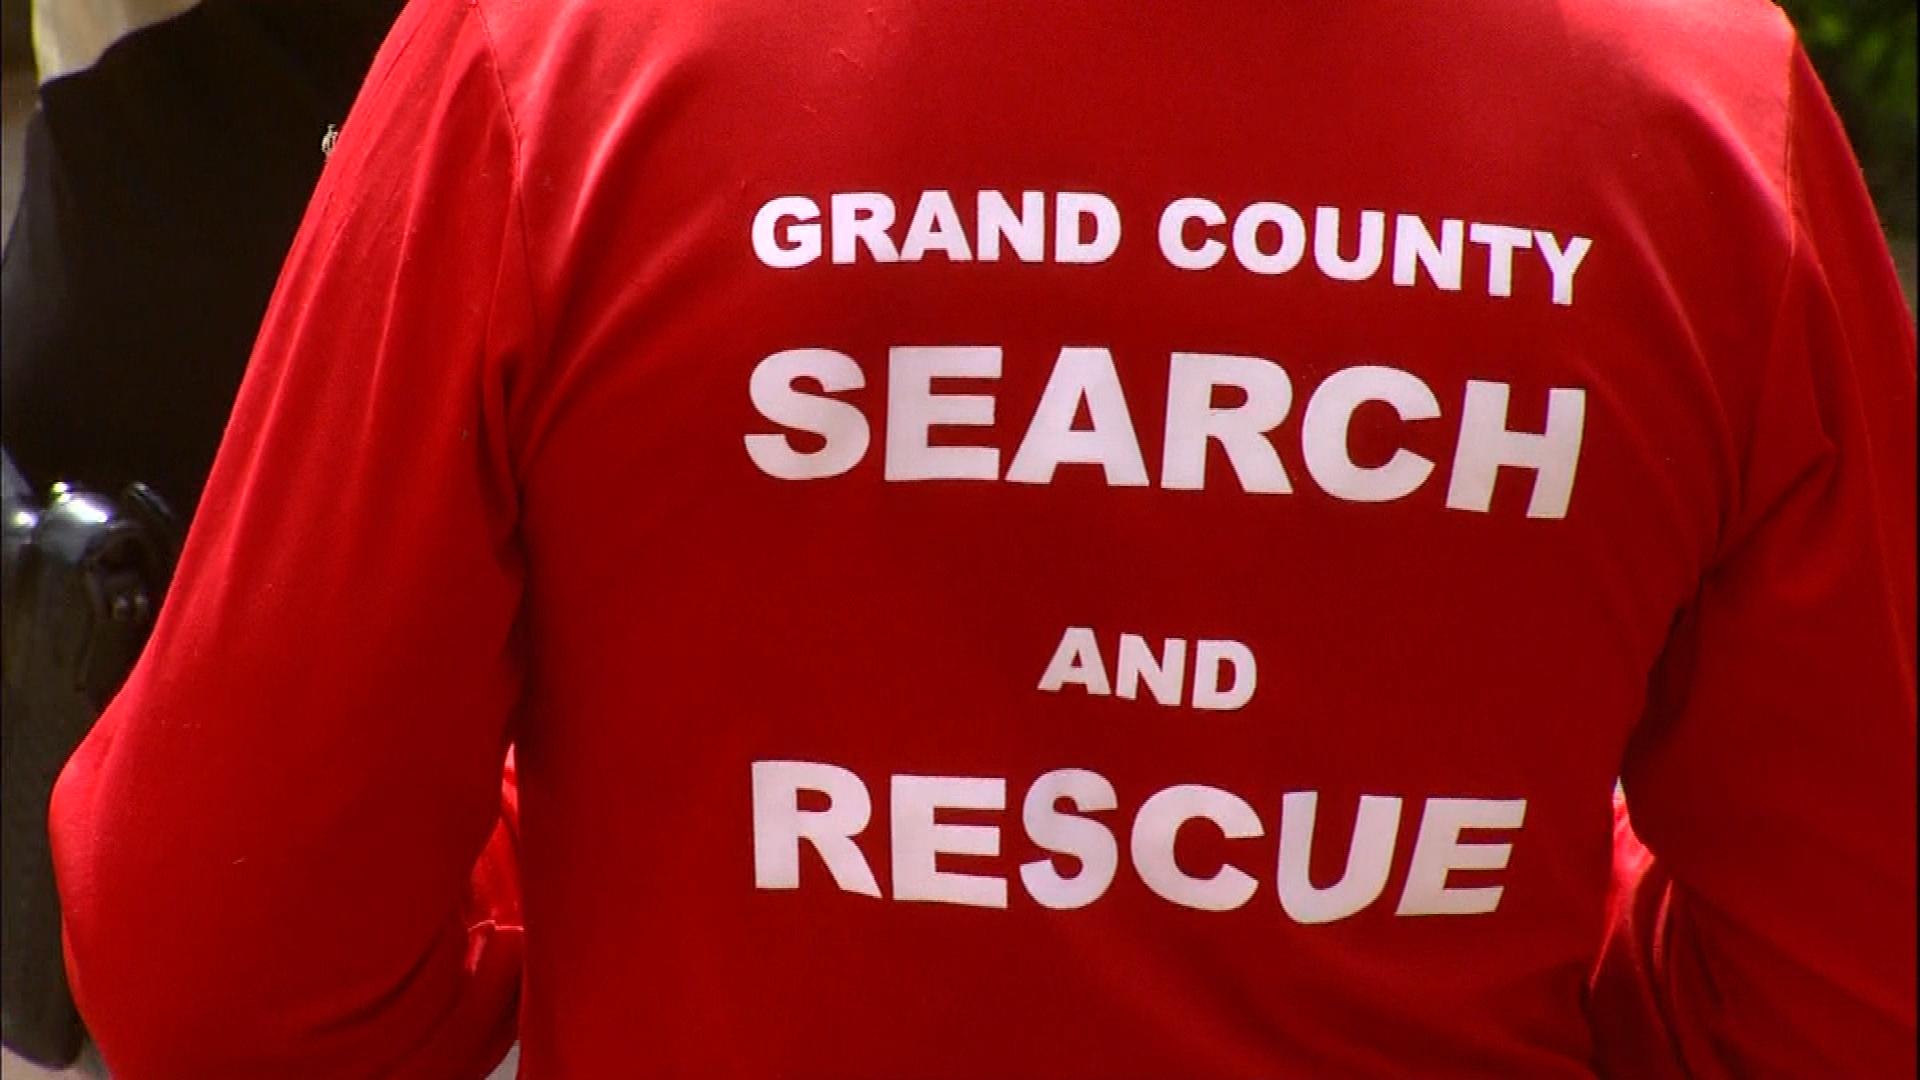 GRAND COUNTY SEARCH and rescue